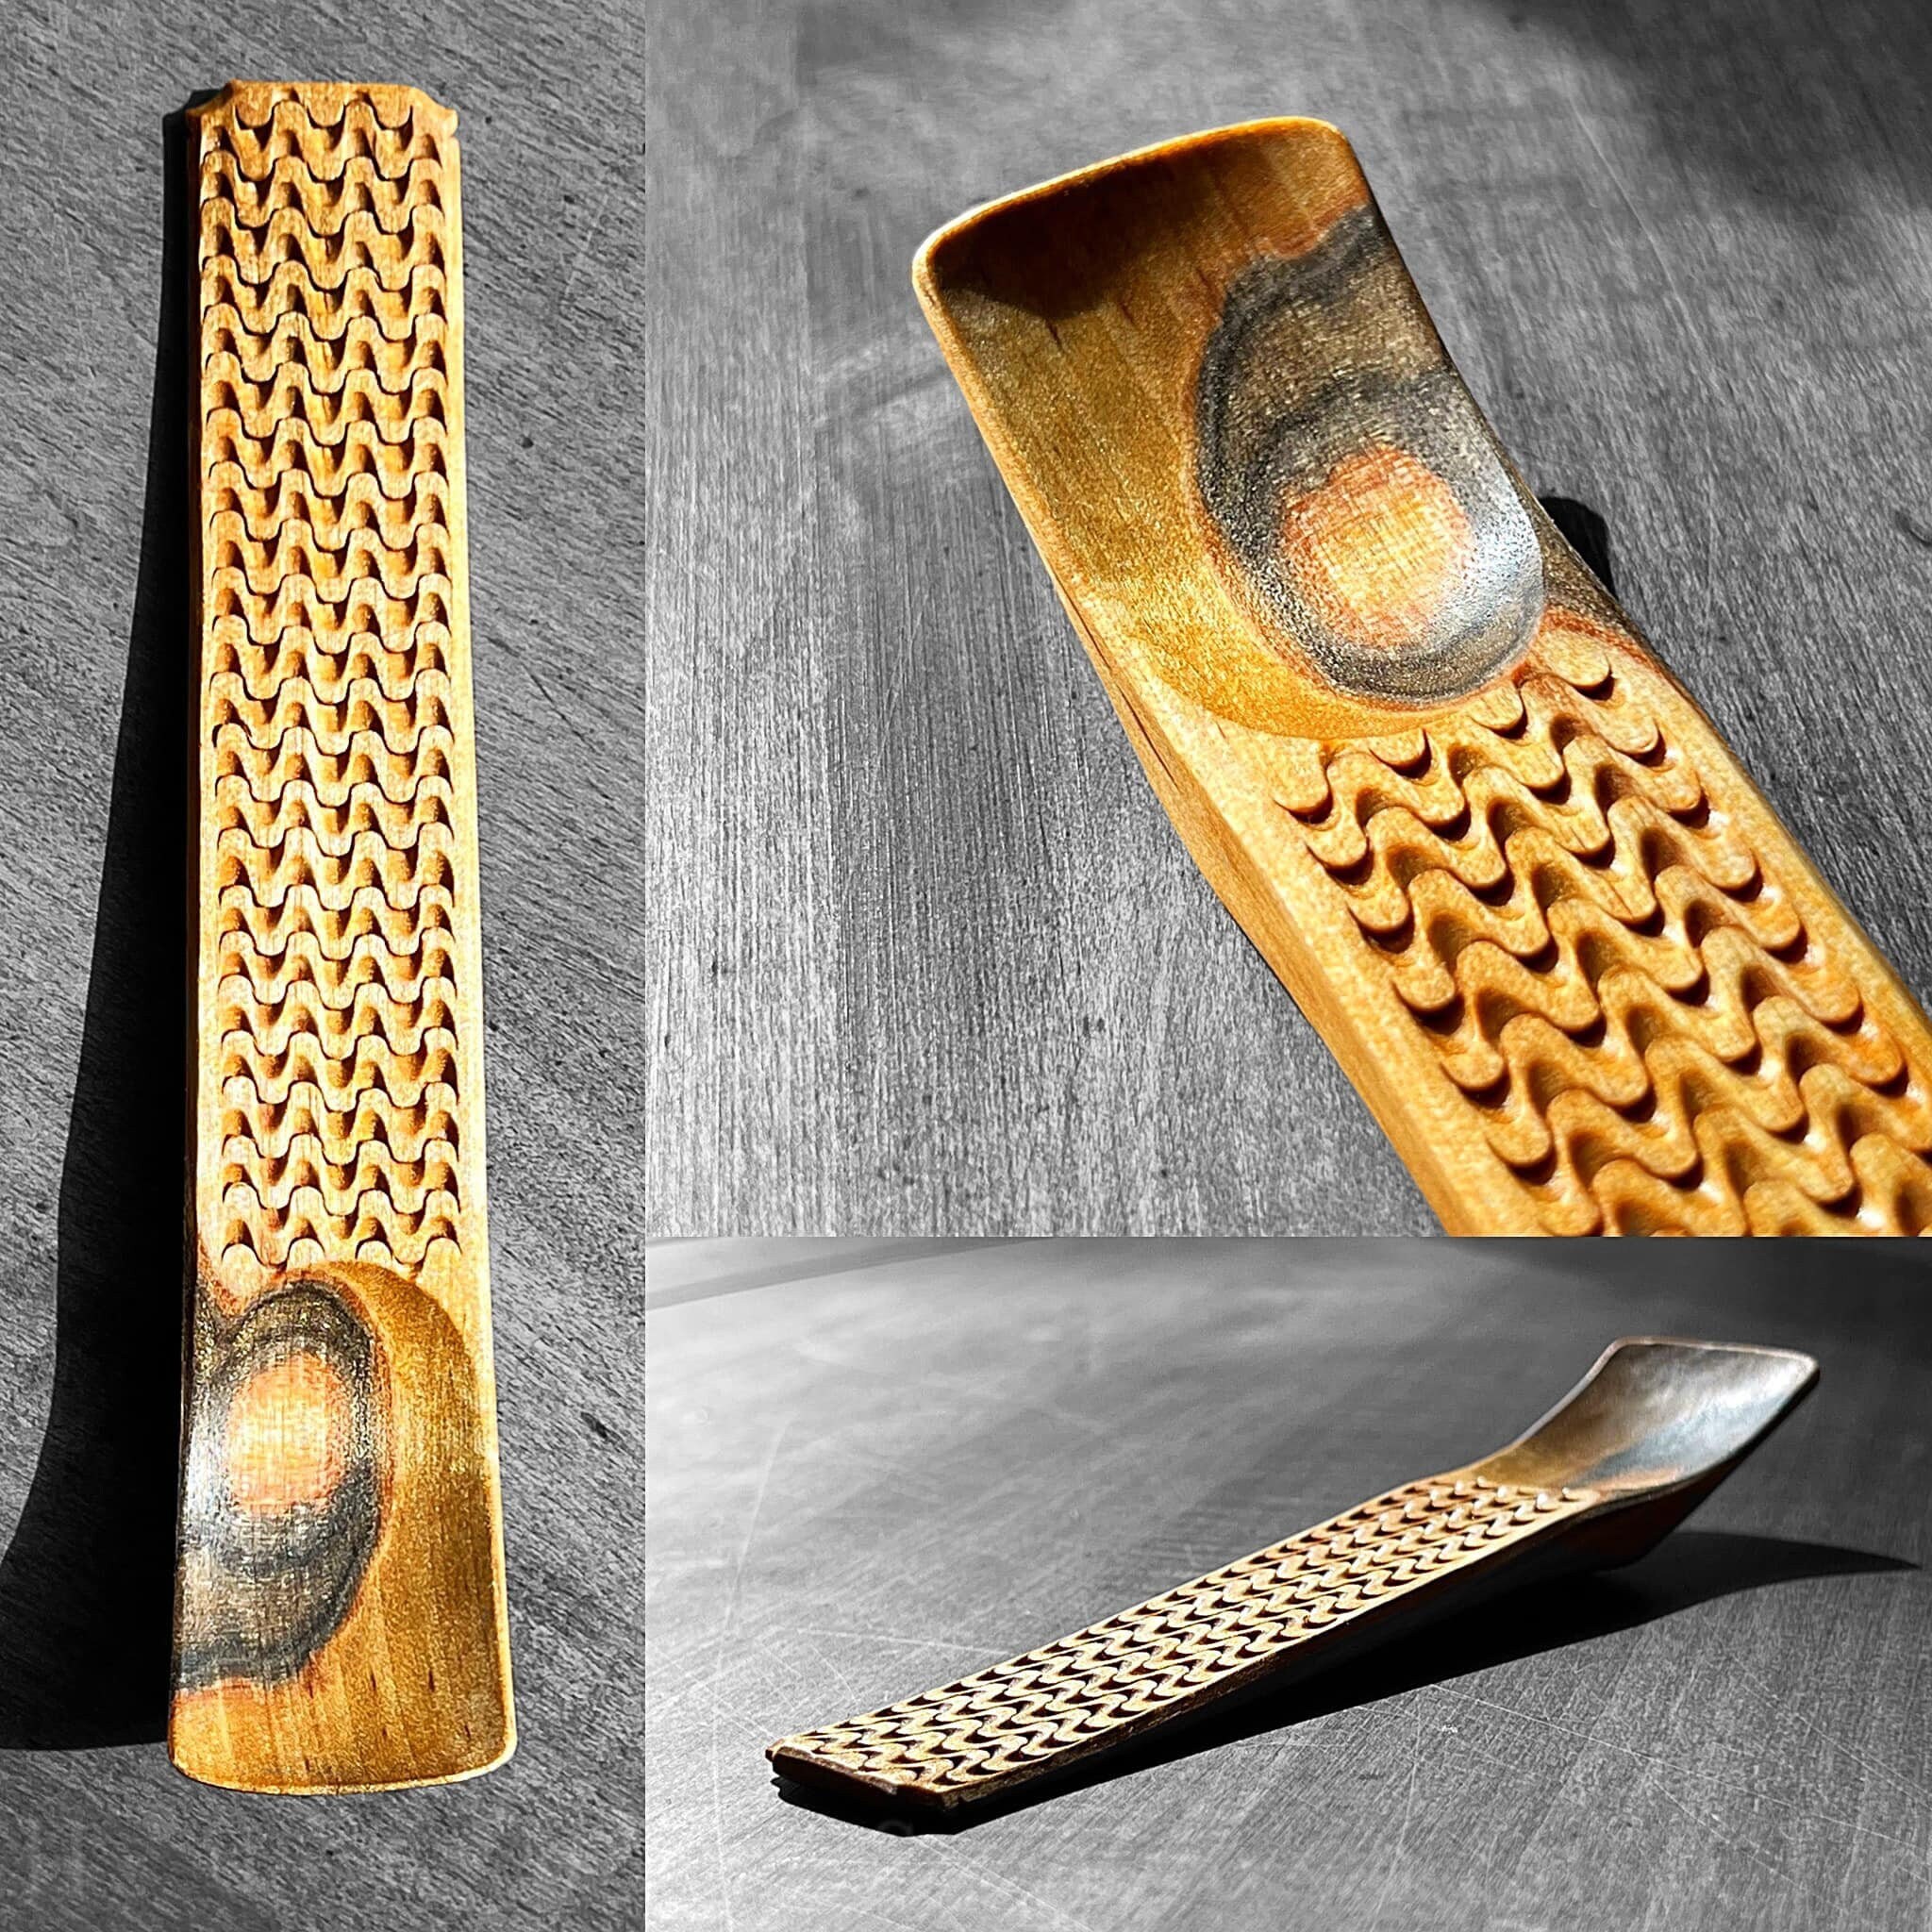 Spoon Burnishing Tool Improve the Finish on Your Hand Carved